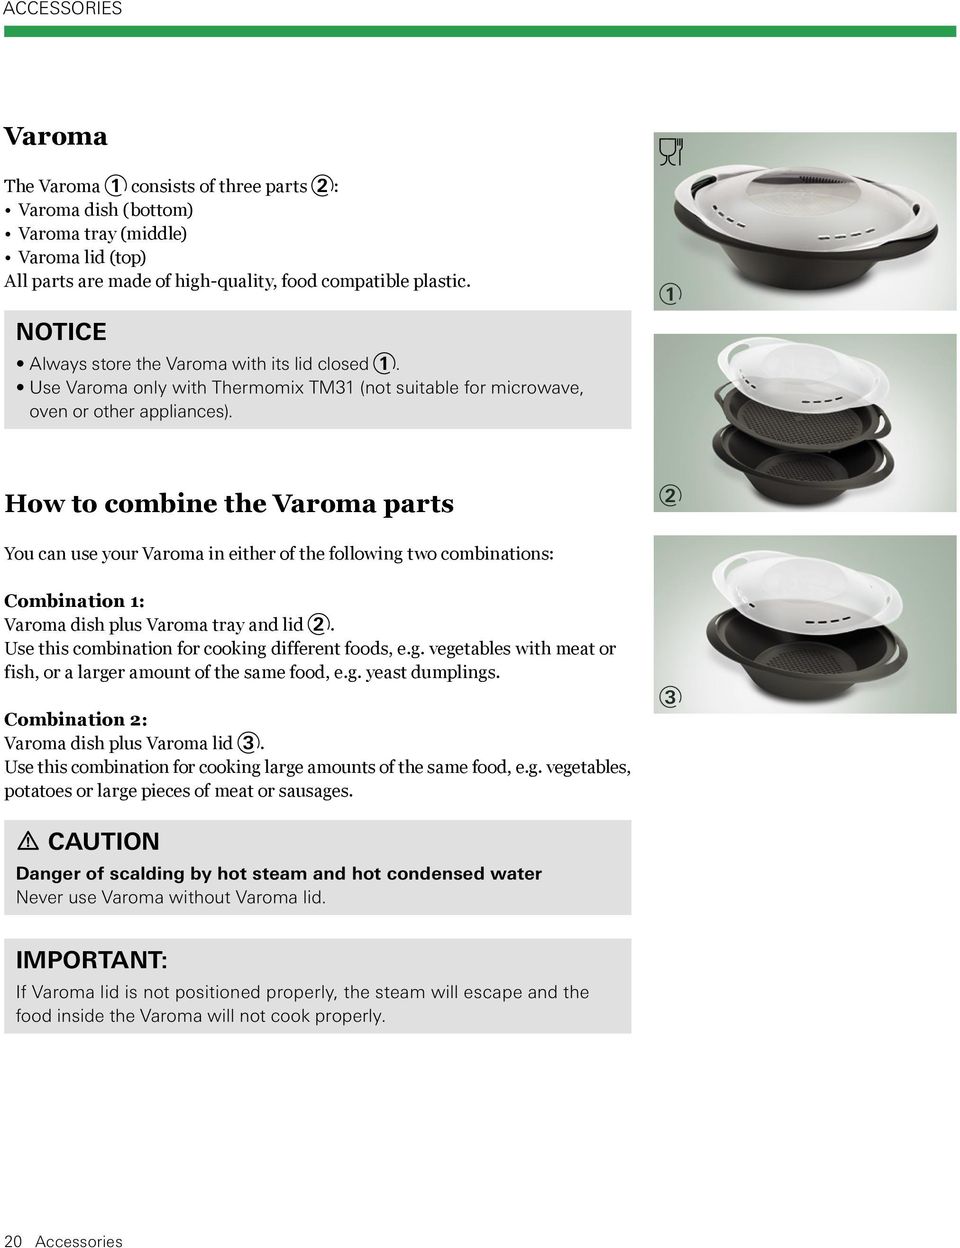 1 How to combine the Varoma parts 2 You can use your Varoma in either of the follow ing two combinations: Combination 1: Varoma dish plus Varoma tray and lid 2.